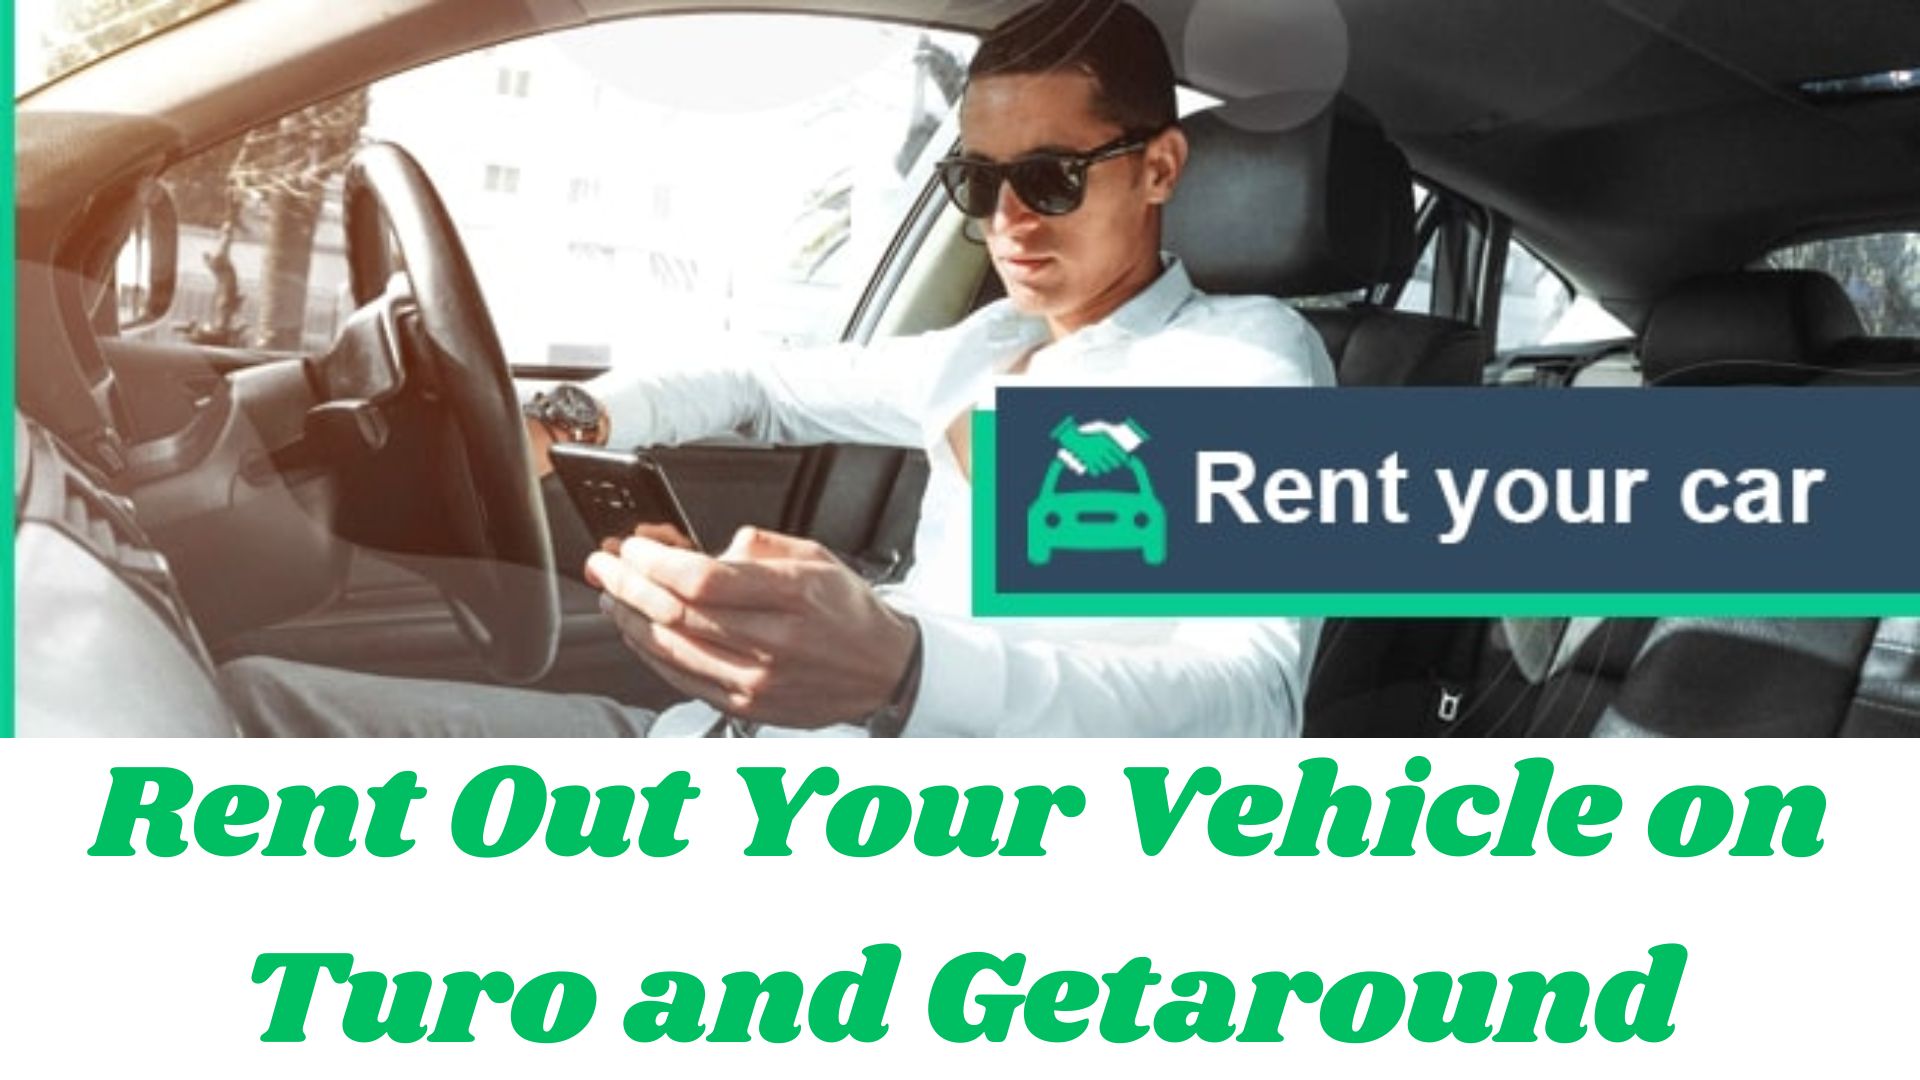 Rent Out Your Vehicle on Turo and Getaround